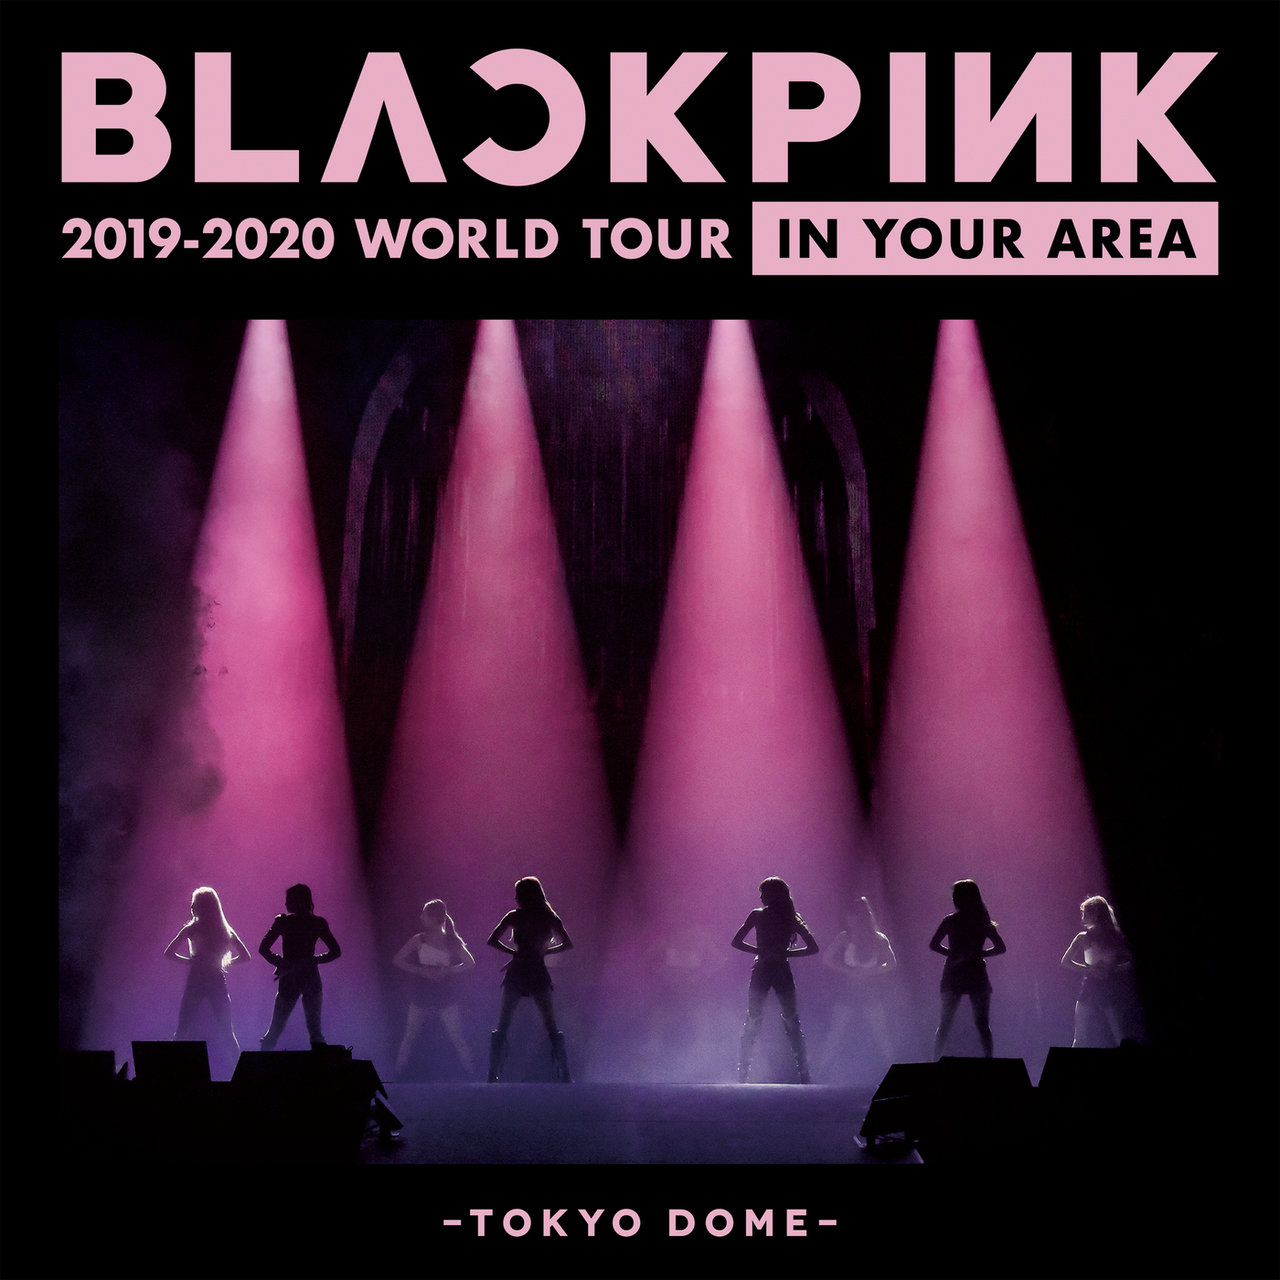 BLACKPINK — Kill This Love - JP Ver./ BLACKPINK 2019-2020 WORLD TOUR IN YOUR AREA -TOKYO DOME- cover artwork